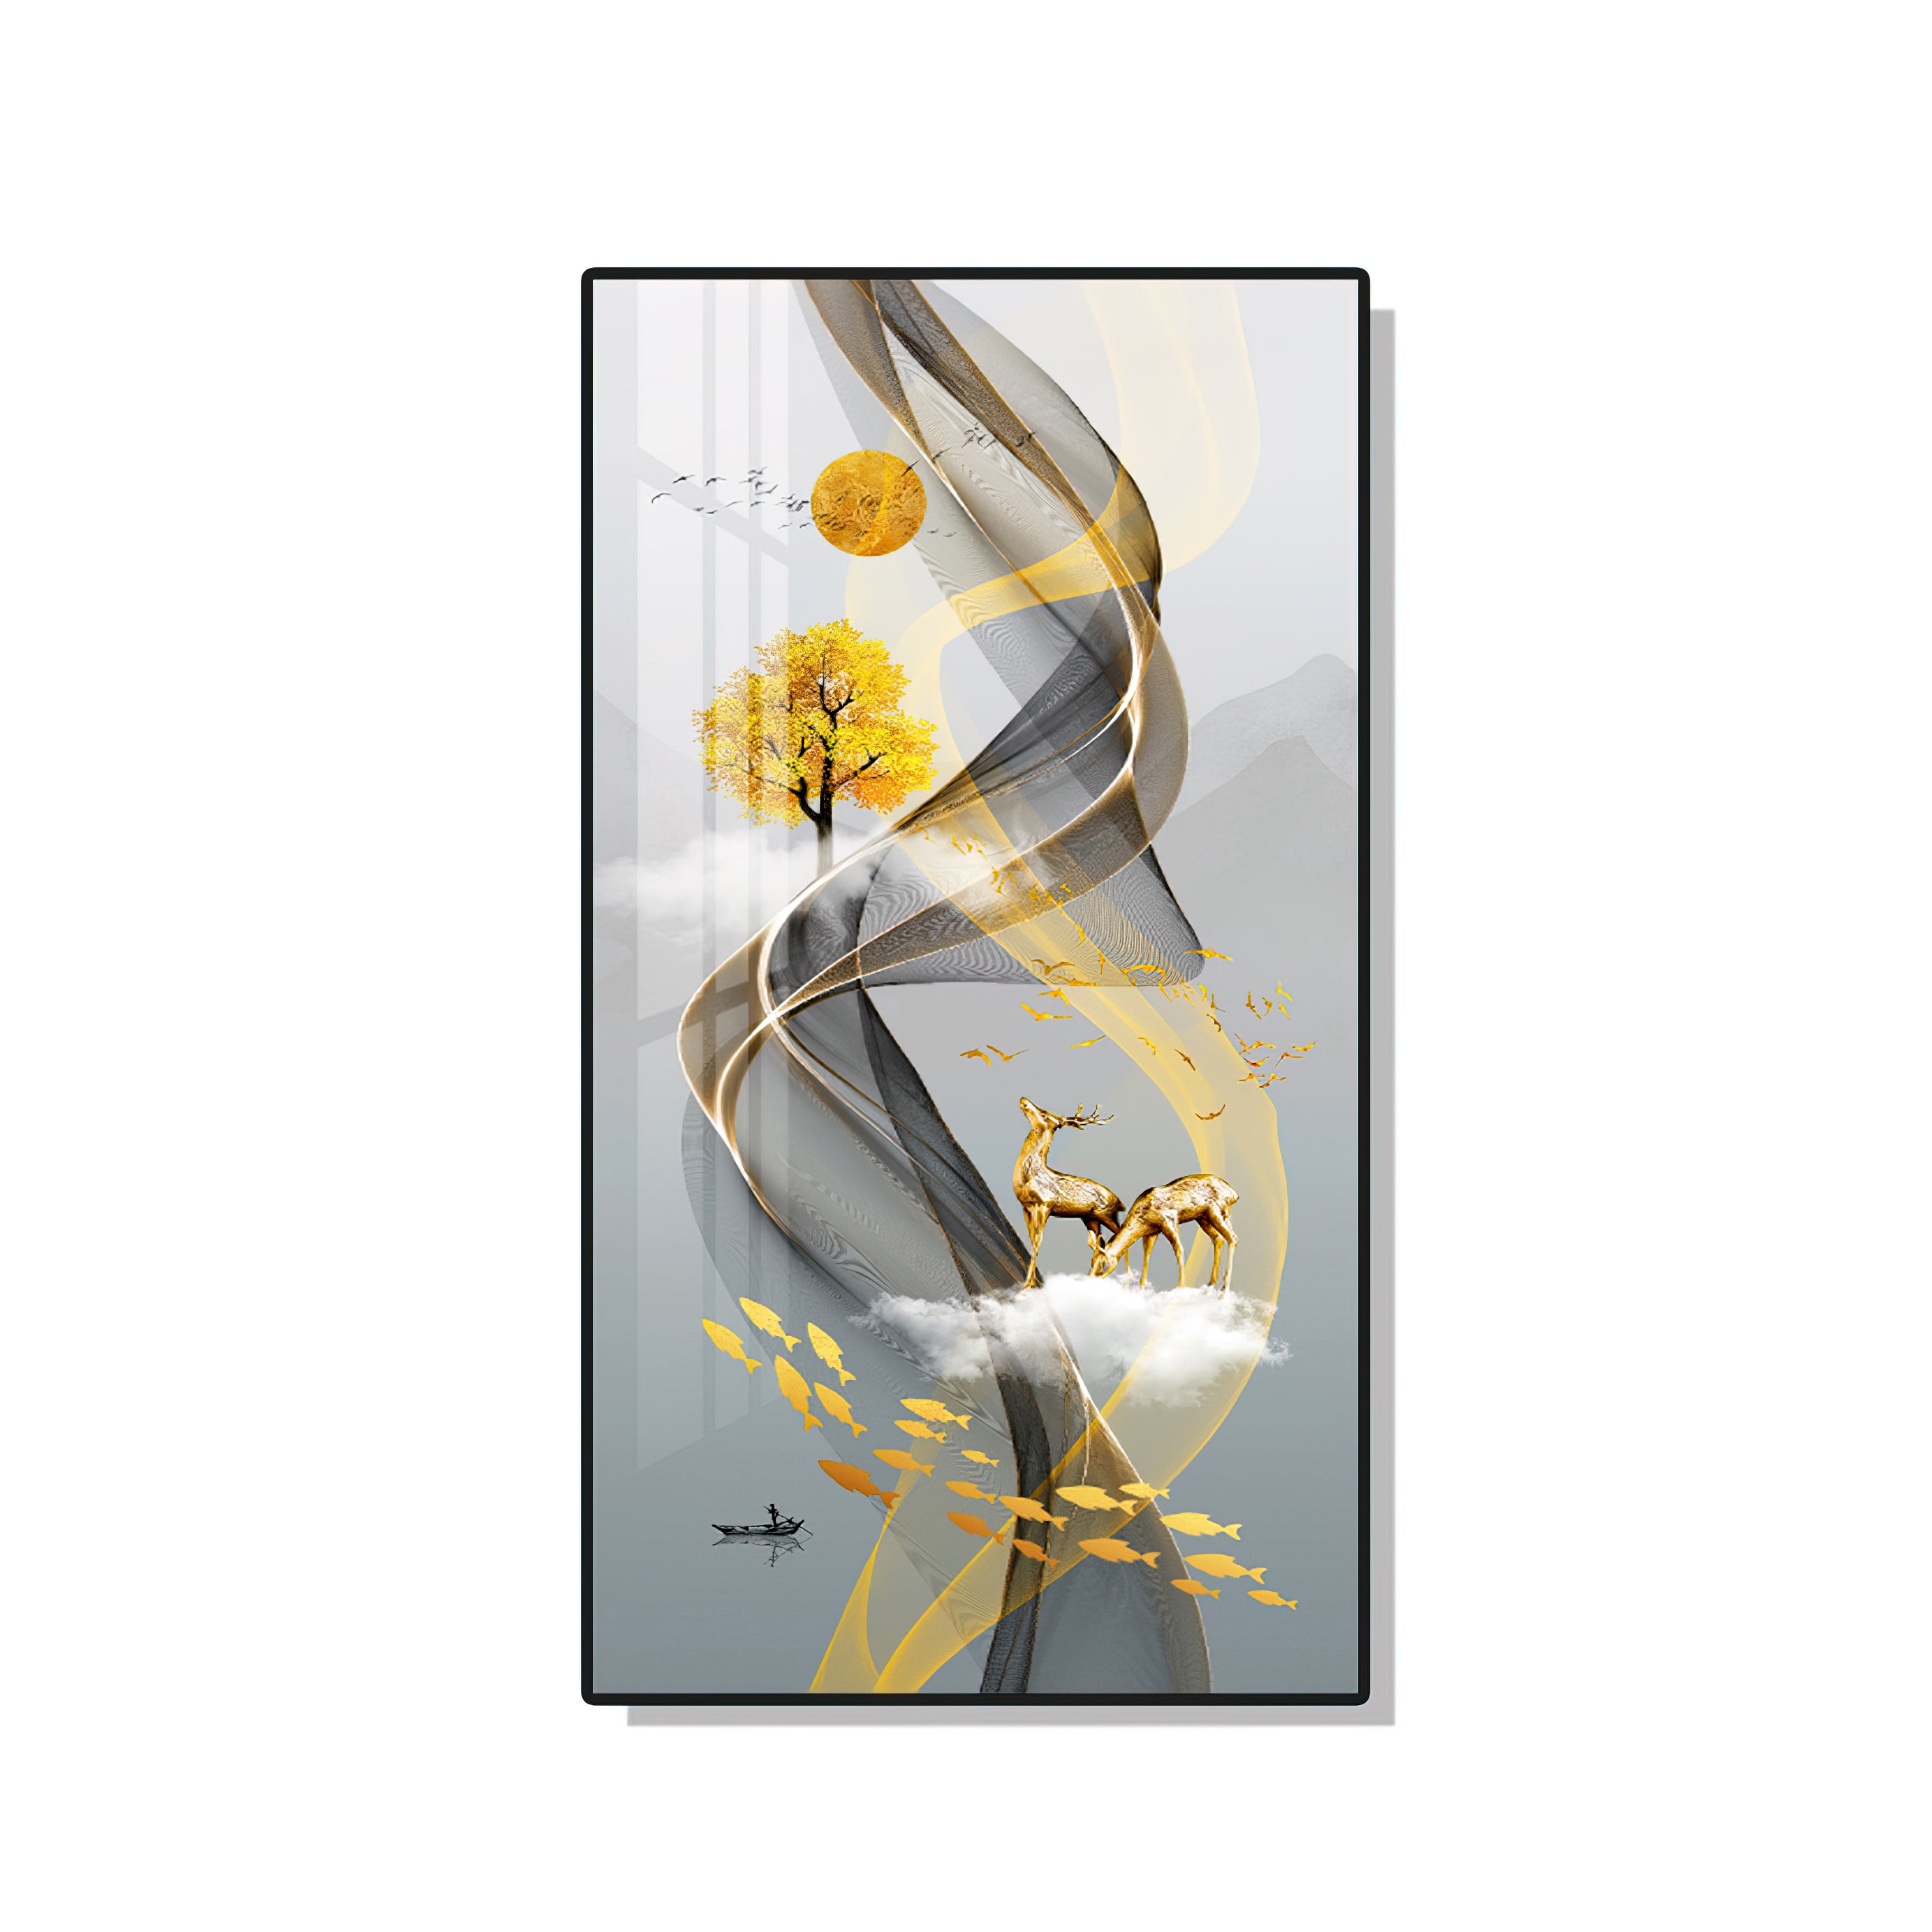 Trendy Wavy Abstract Wall Painting - 50x100 cm Artwork Home Decor crystal porcelain Framed Large wall wall art wall accents